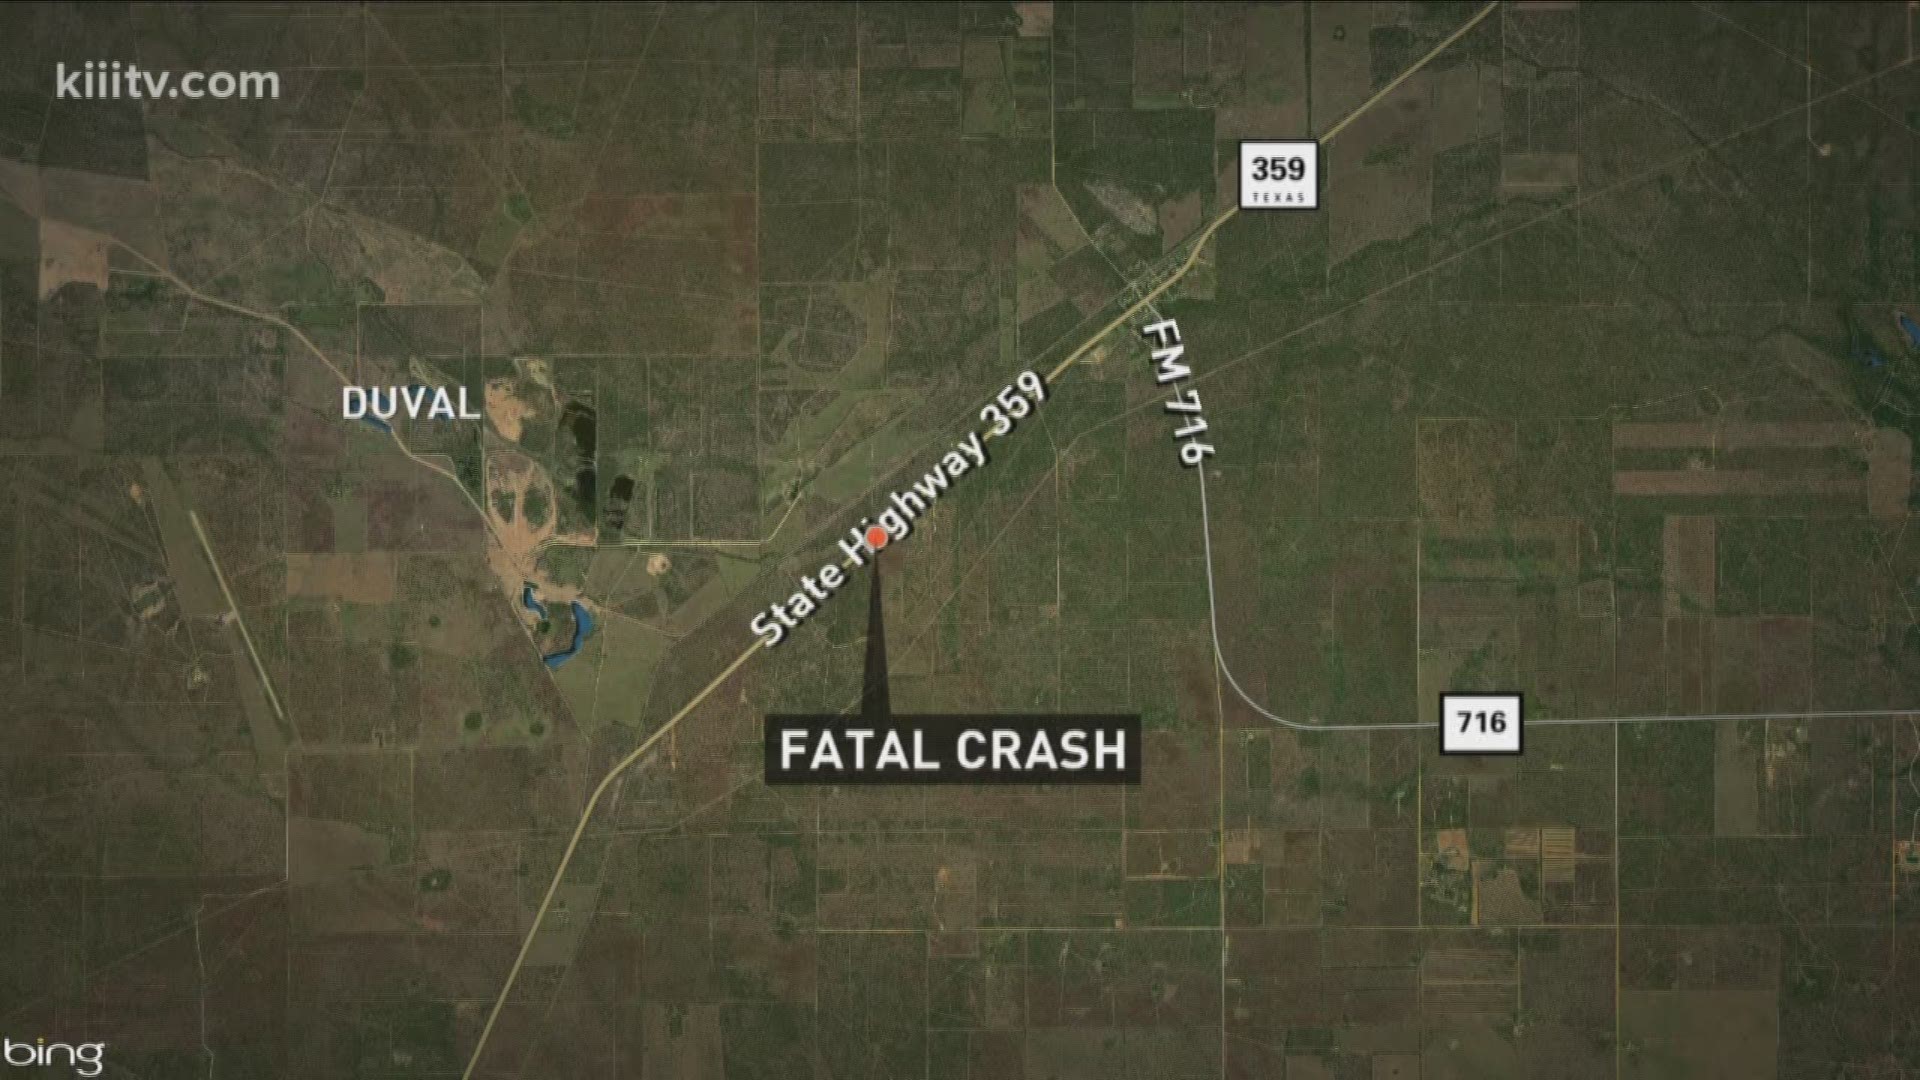 53-year-old Edward Alaniz was pronounced dead at the scene of the crash.